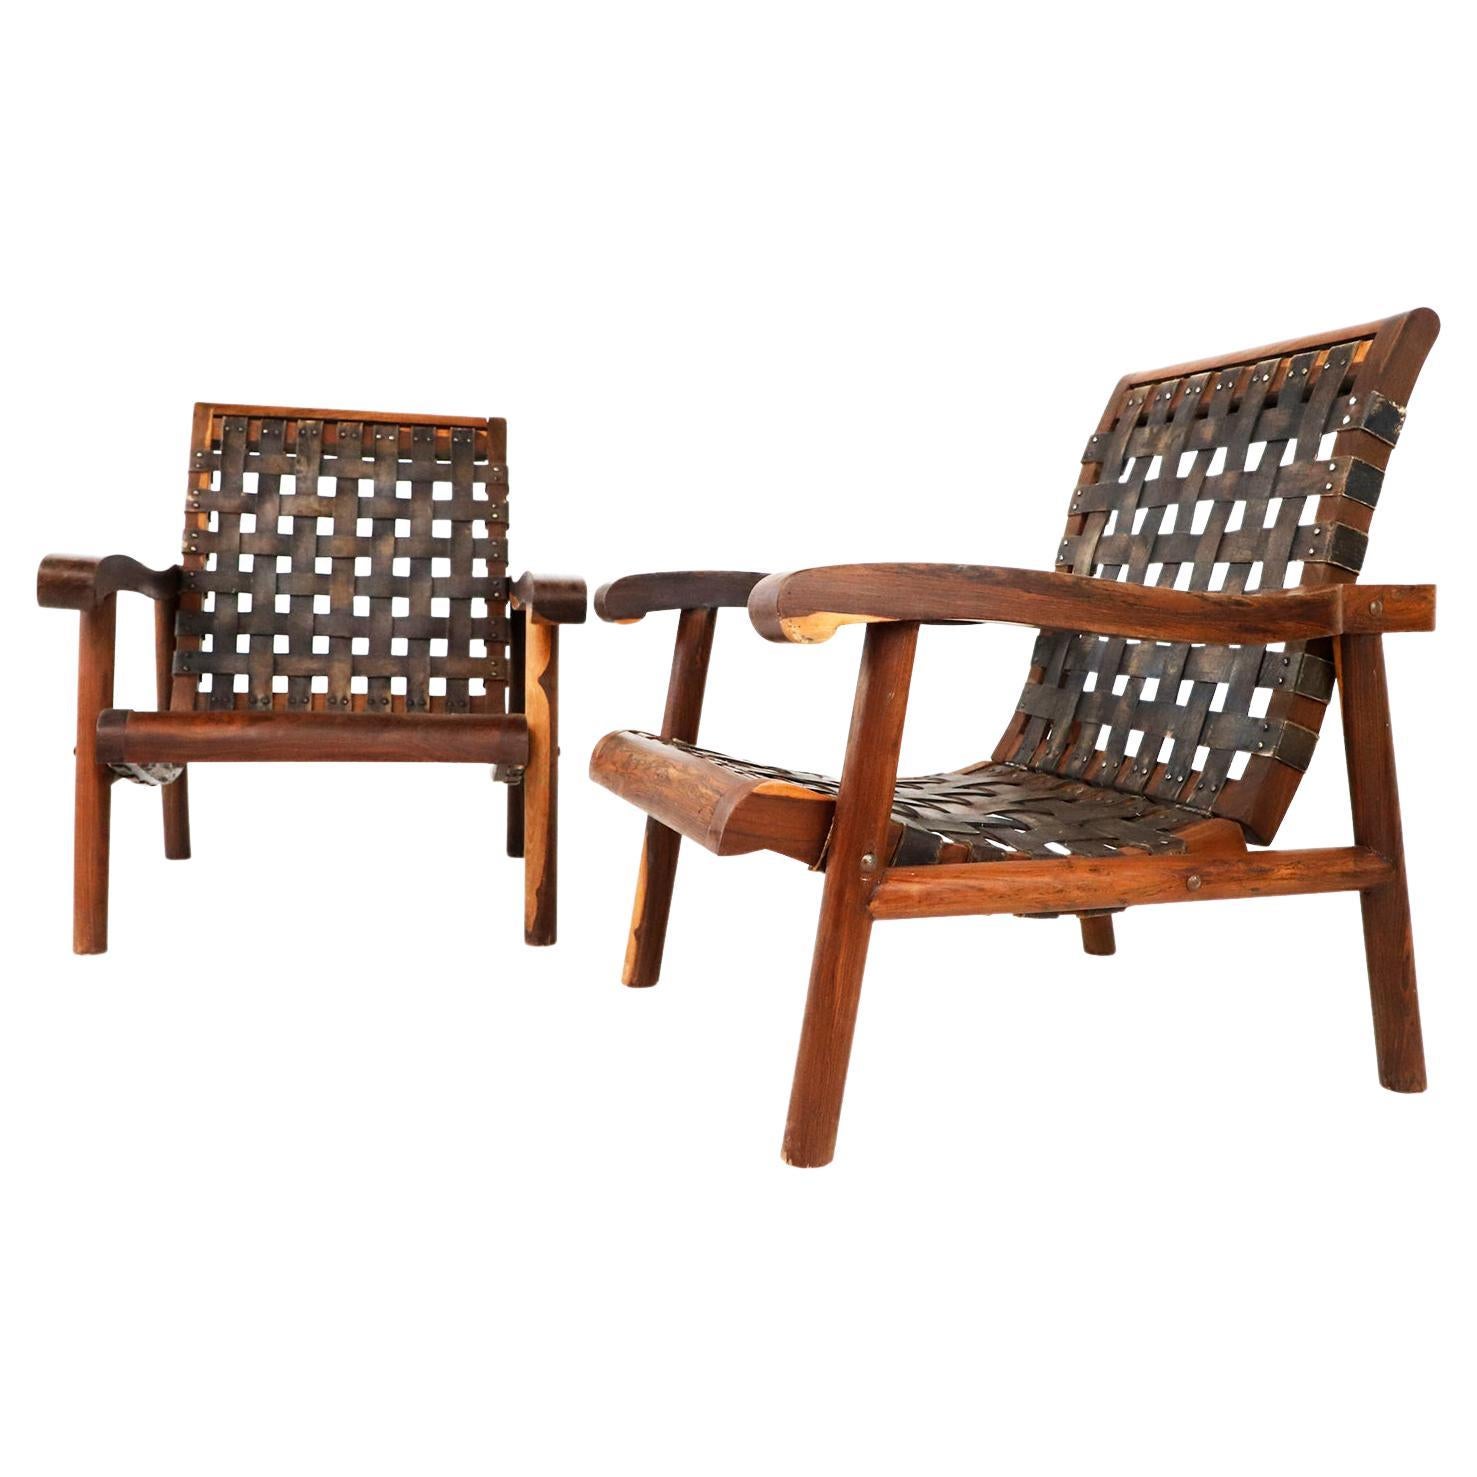 Pair of Antique Mexican Hacienda Armchairs Made in Solid Cocobolo Wood